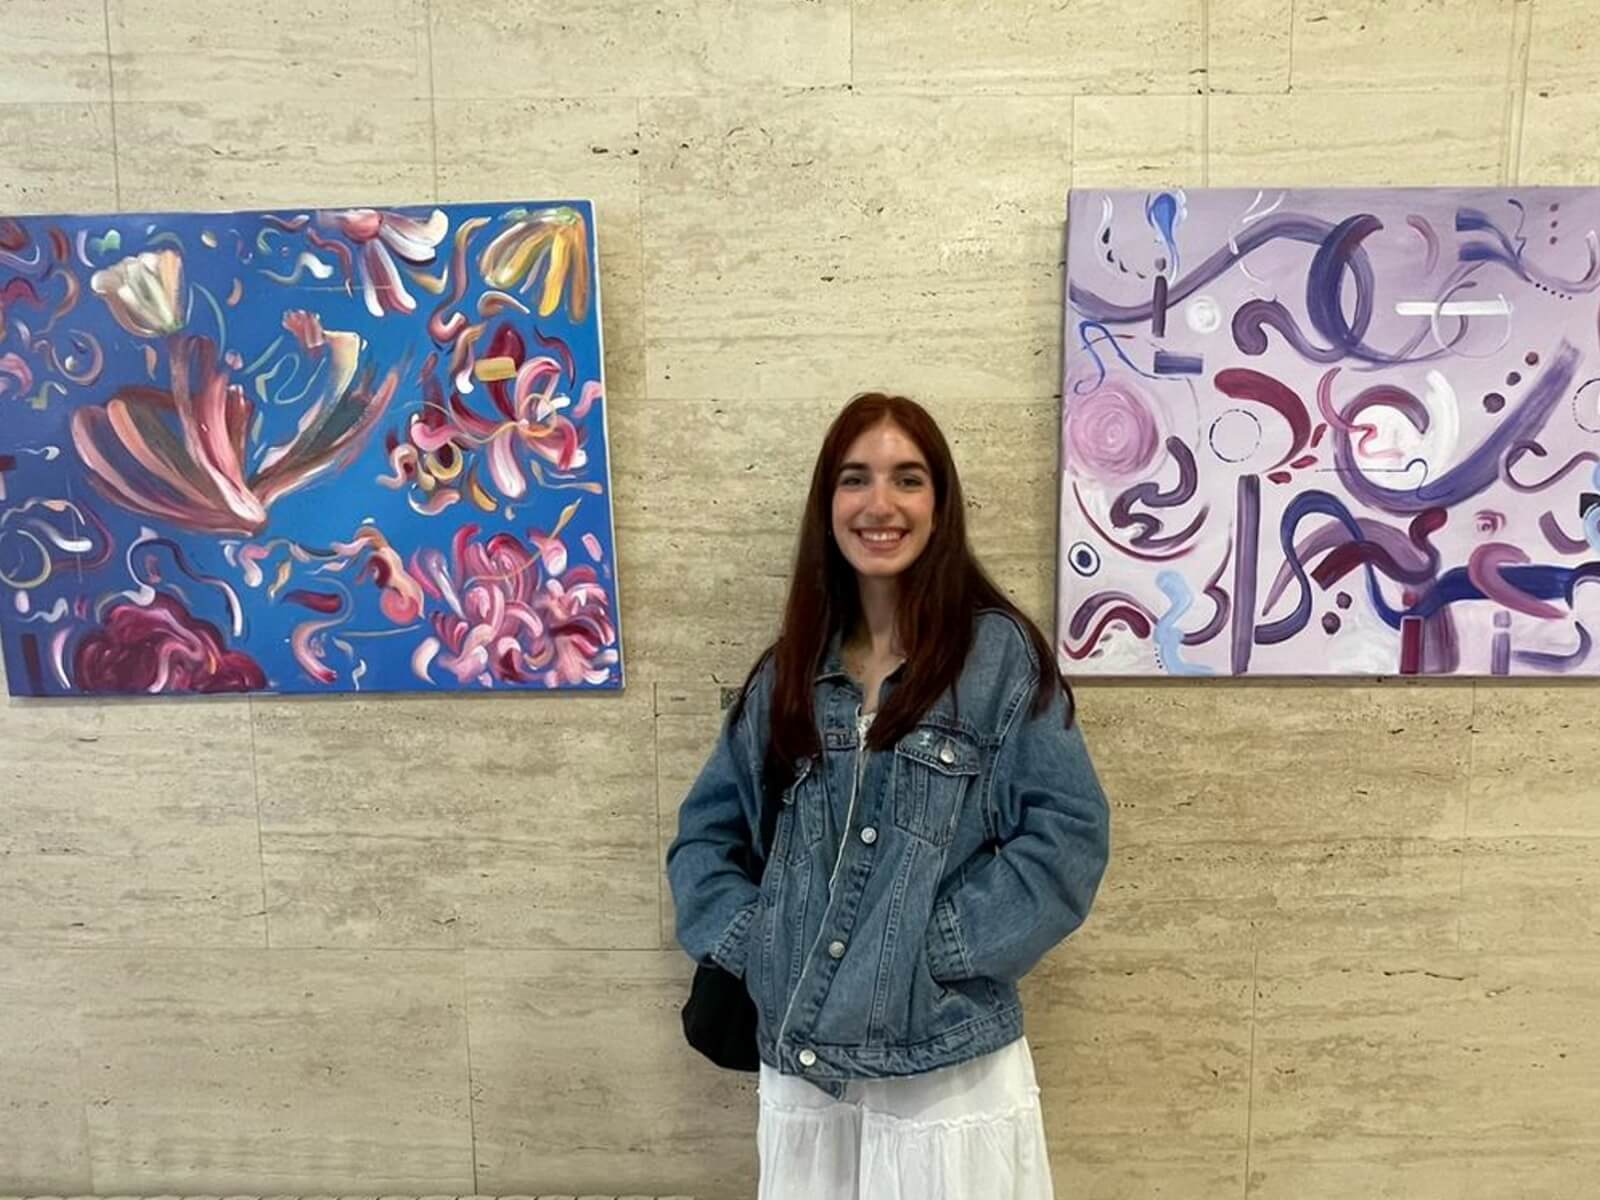 Nerea Ayala Castellanos standing between two abstract paintings on a stone wall.